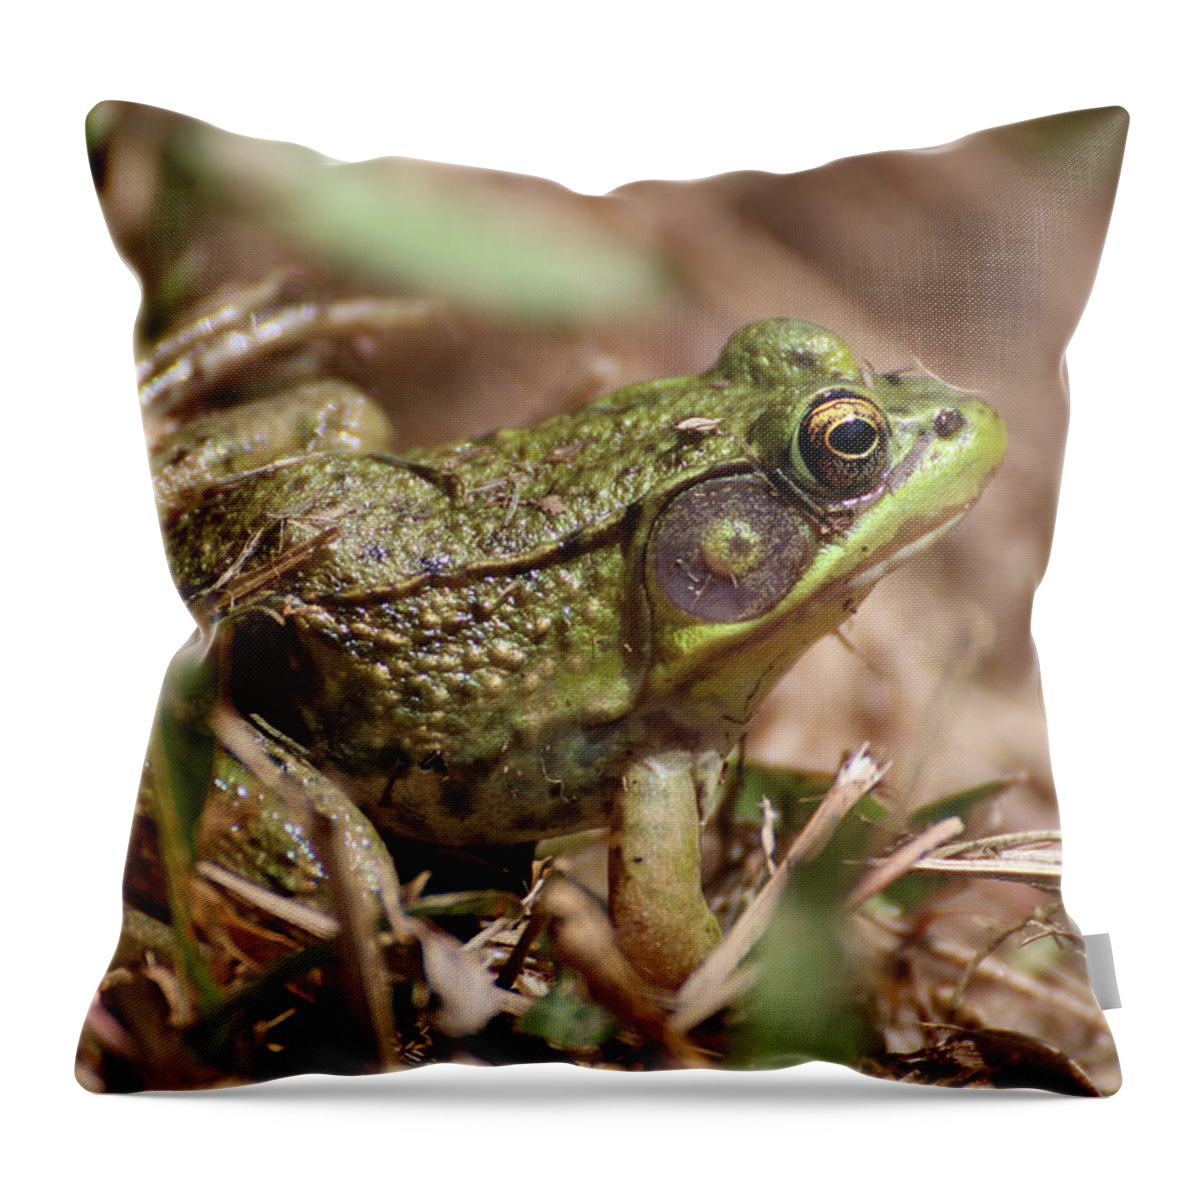 Frog Throw Pillow featuring the photograph Little Green Frog by William Selander